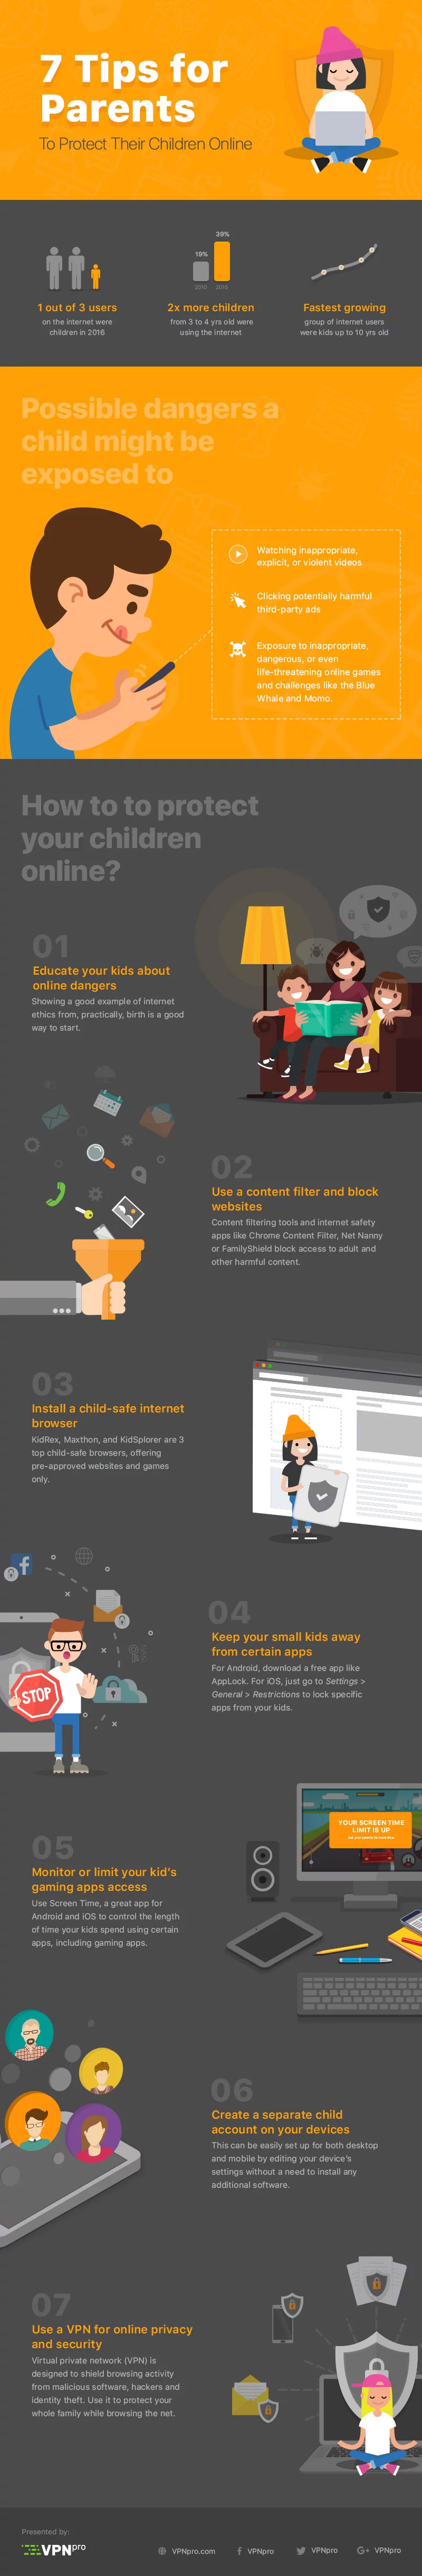 Internet Safety for Kids: 7 Tips for Parents [Infographic]